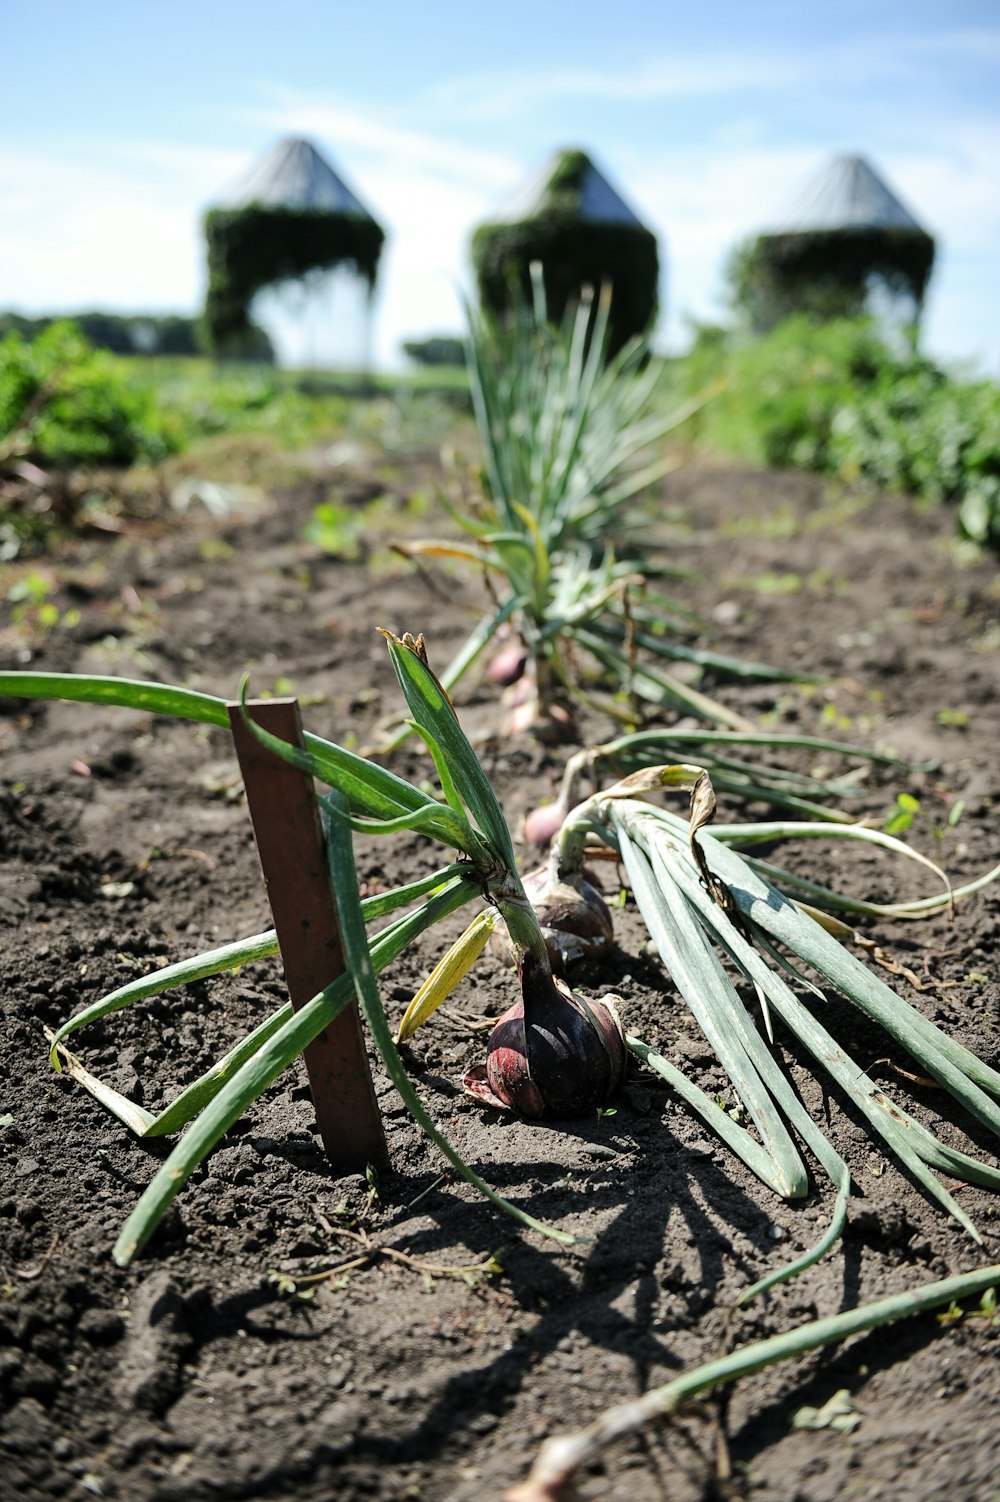 a row of green onions growing in a field